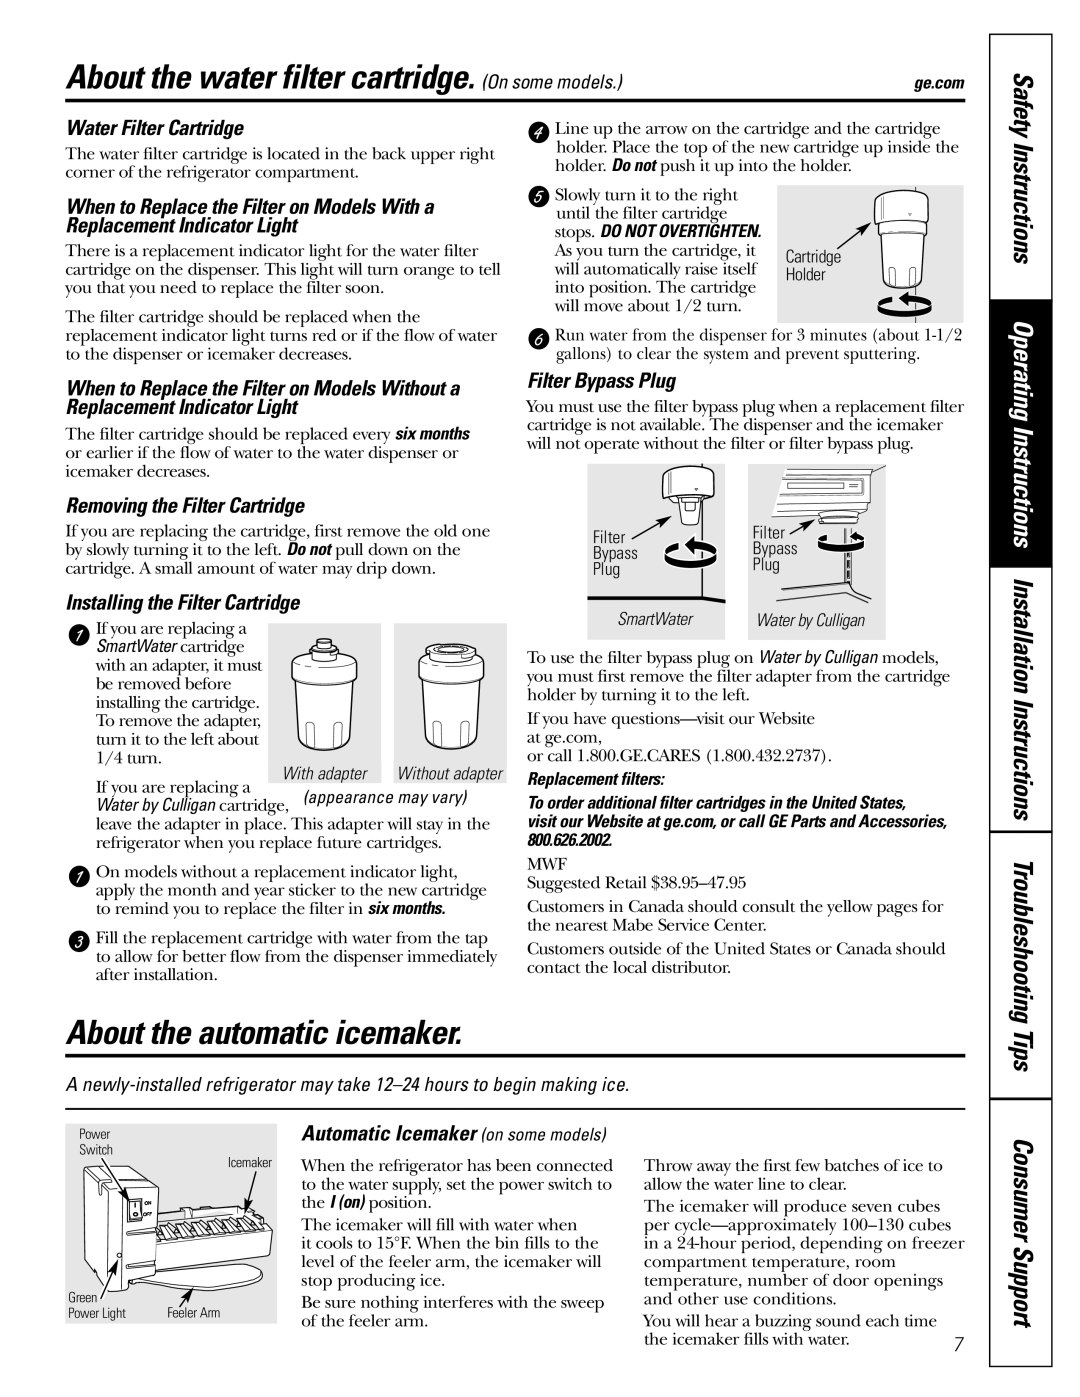 GE GSF25IGZWW About the water filter cartridge. On some models, About the automatic icemaker, Tips, Instructions Operating 